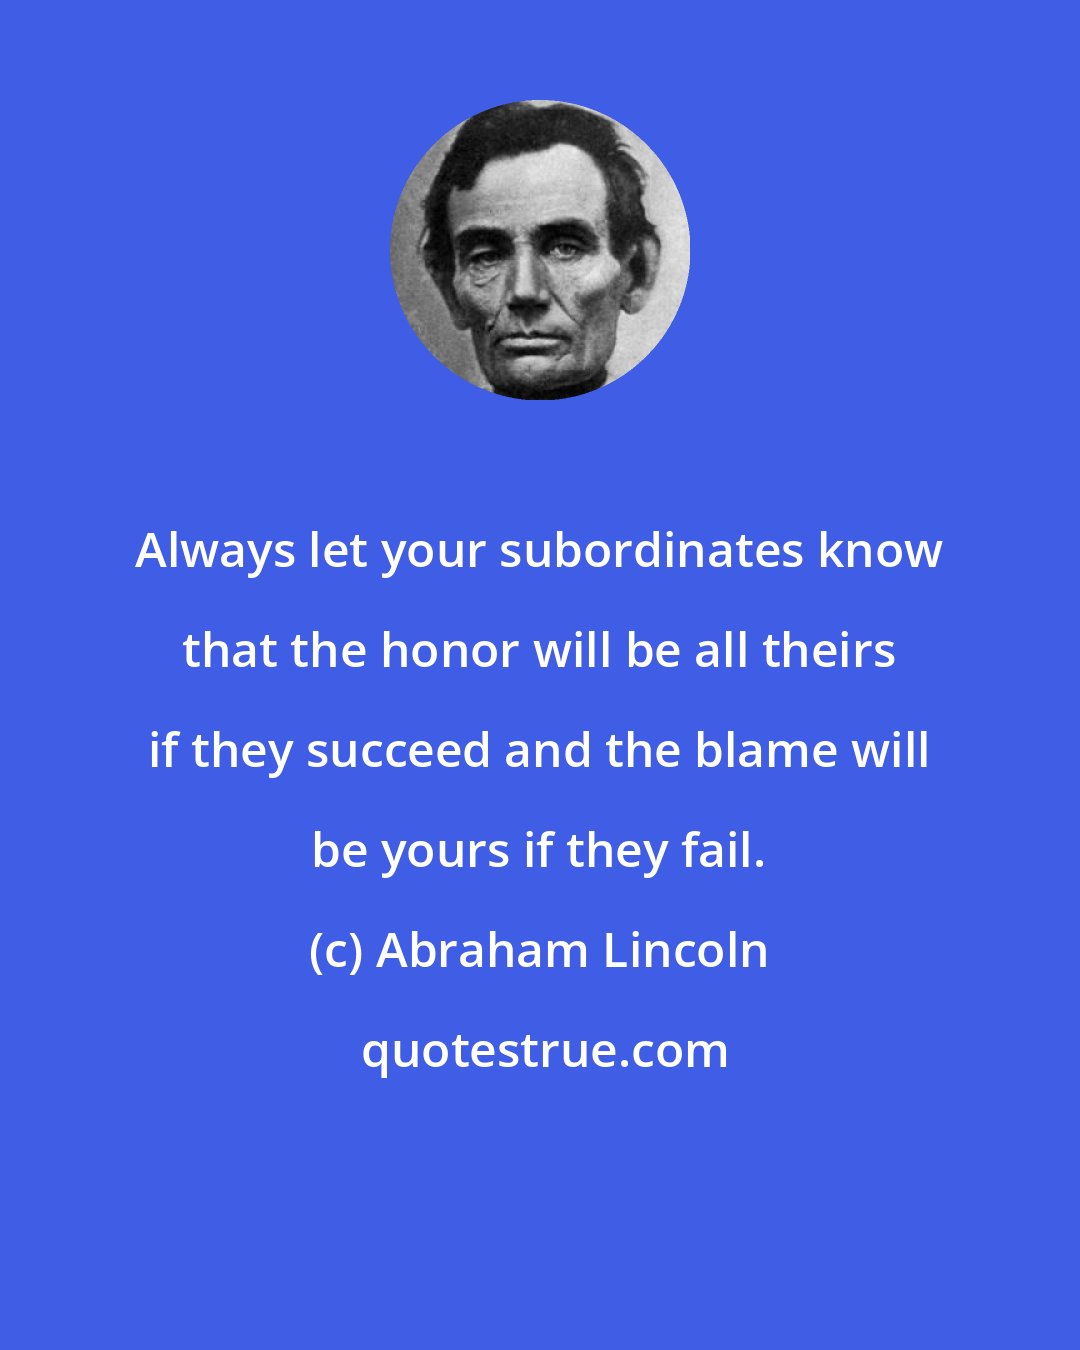 Abraham Lincoln: Always let your subordinates know that the honor will be all theirs if they succeed and the blame will be yours if they fail.